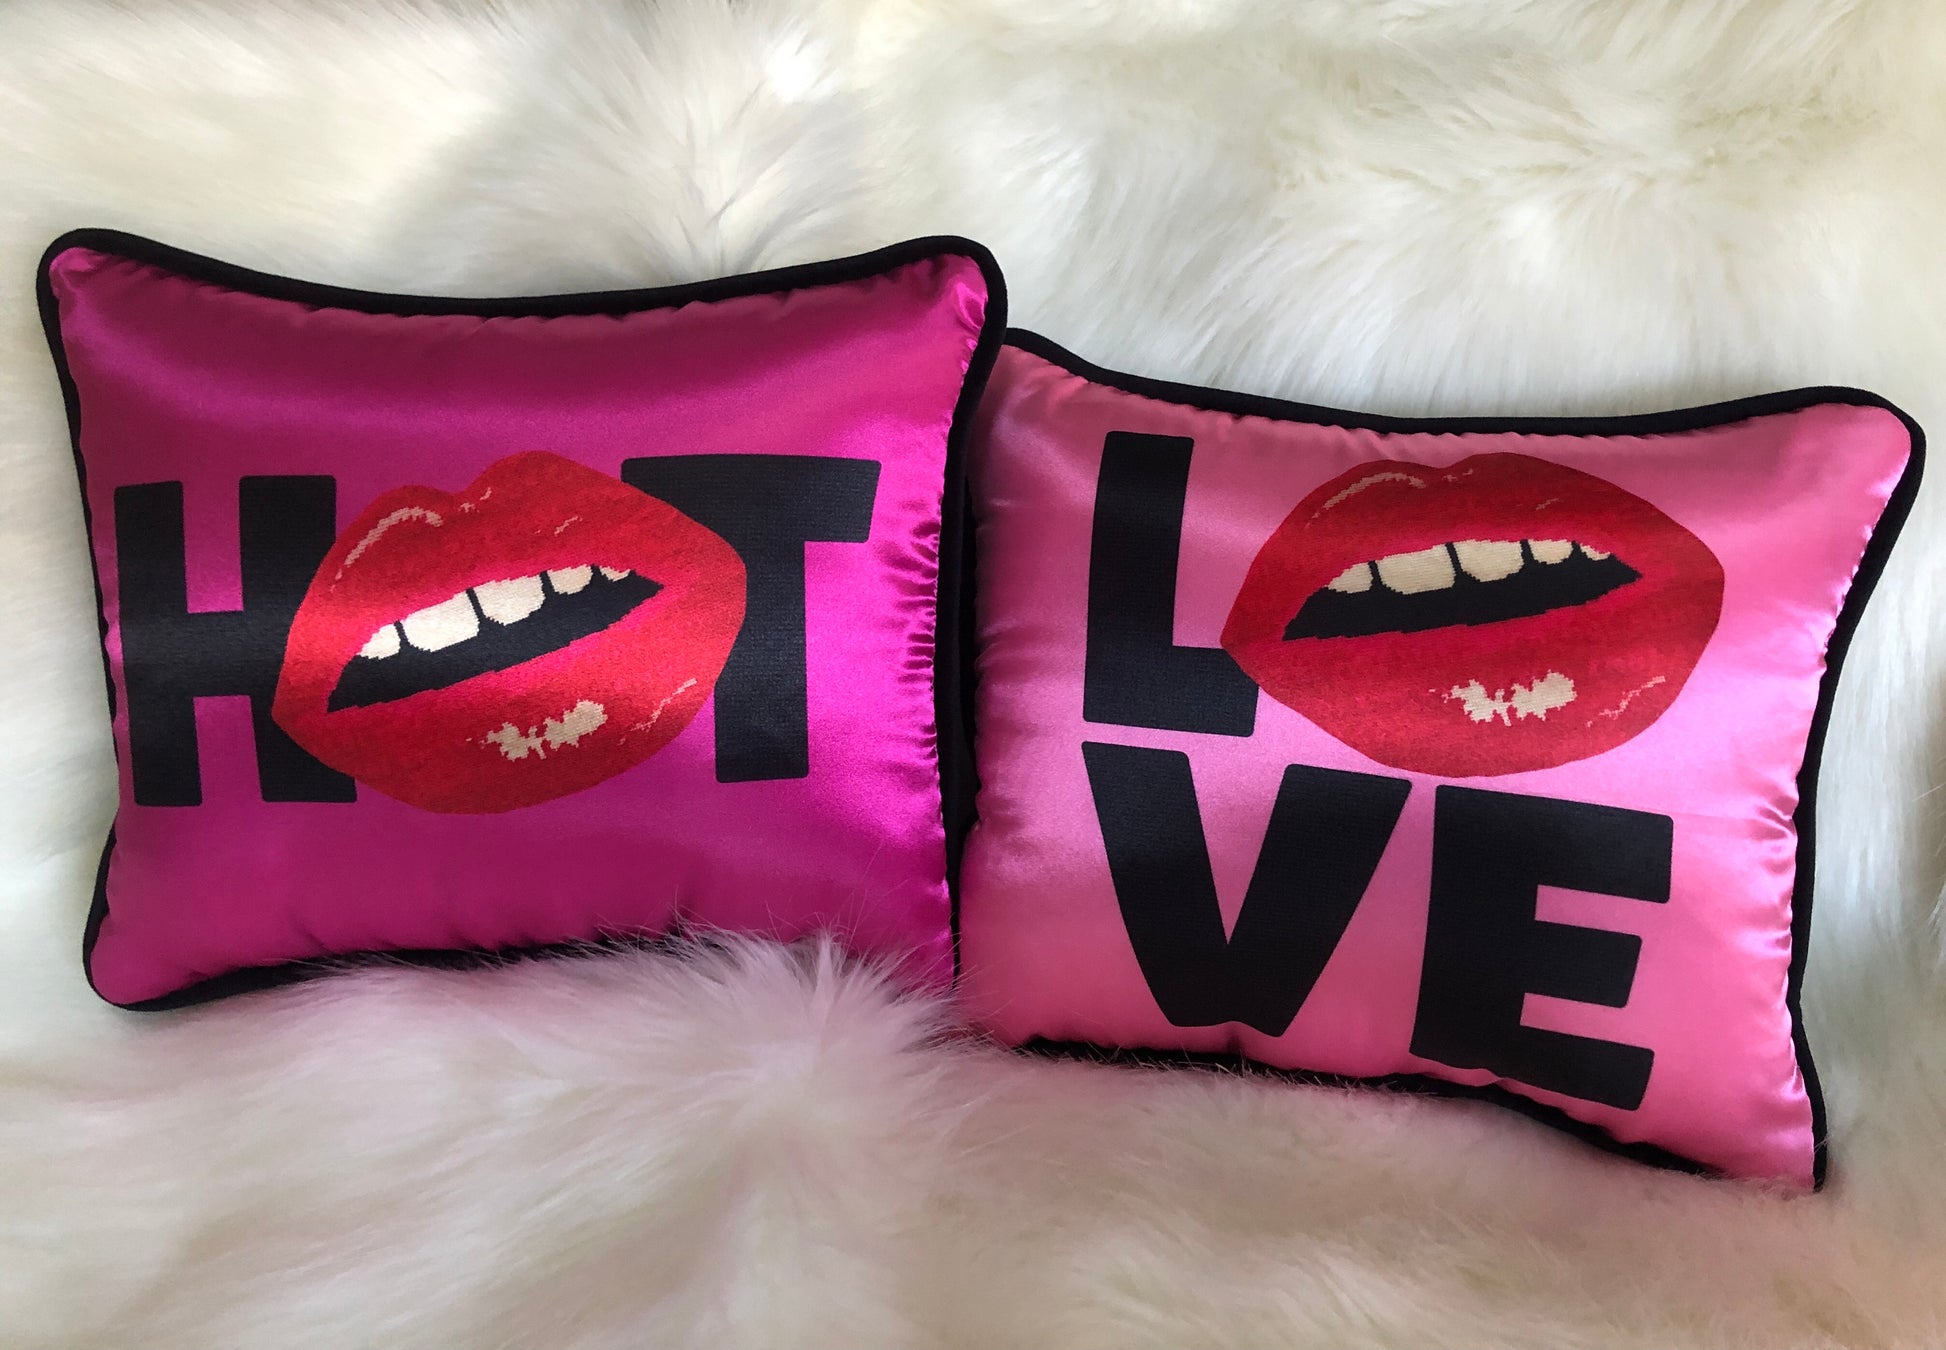 hot pink pillow with blackletters - L, red lips for an O, V & E stacked underneath with H (lips) T magenta pillow